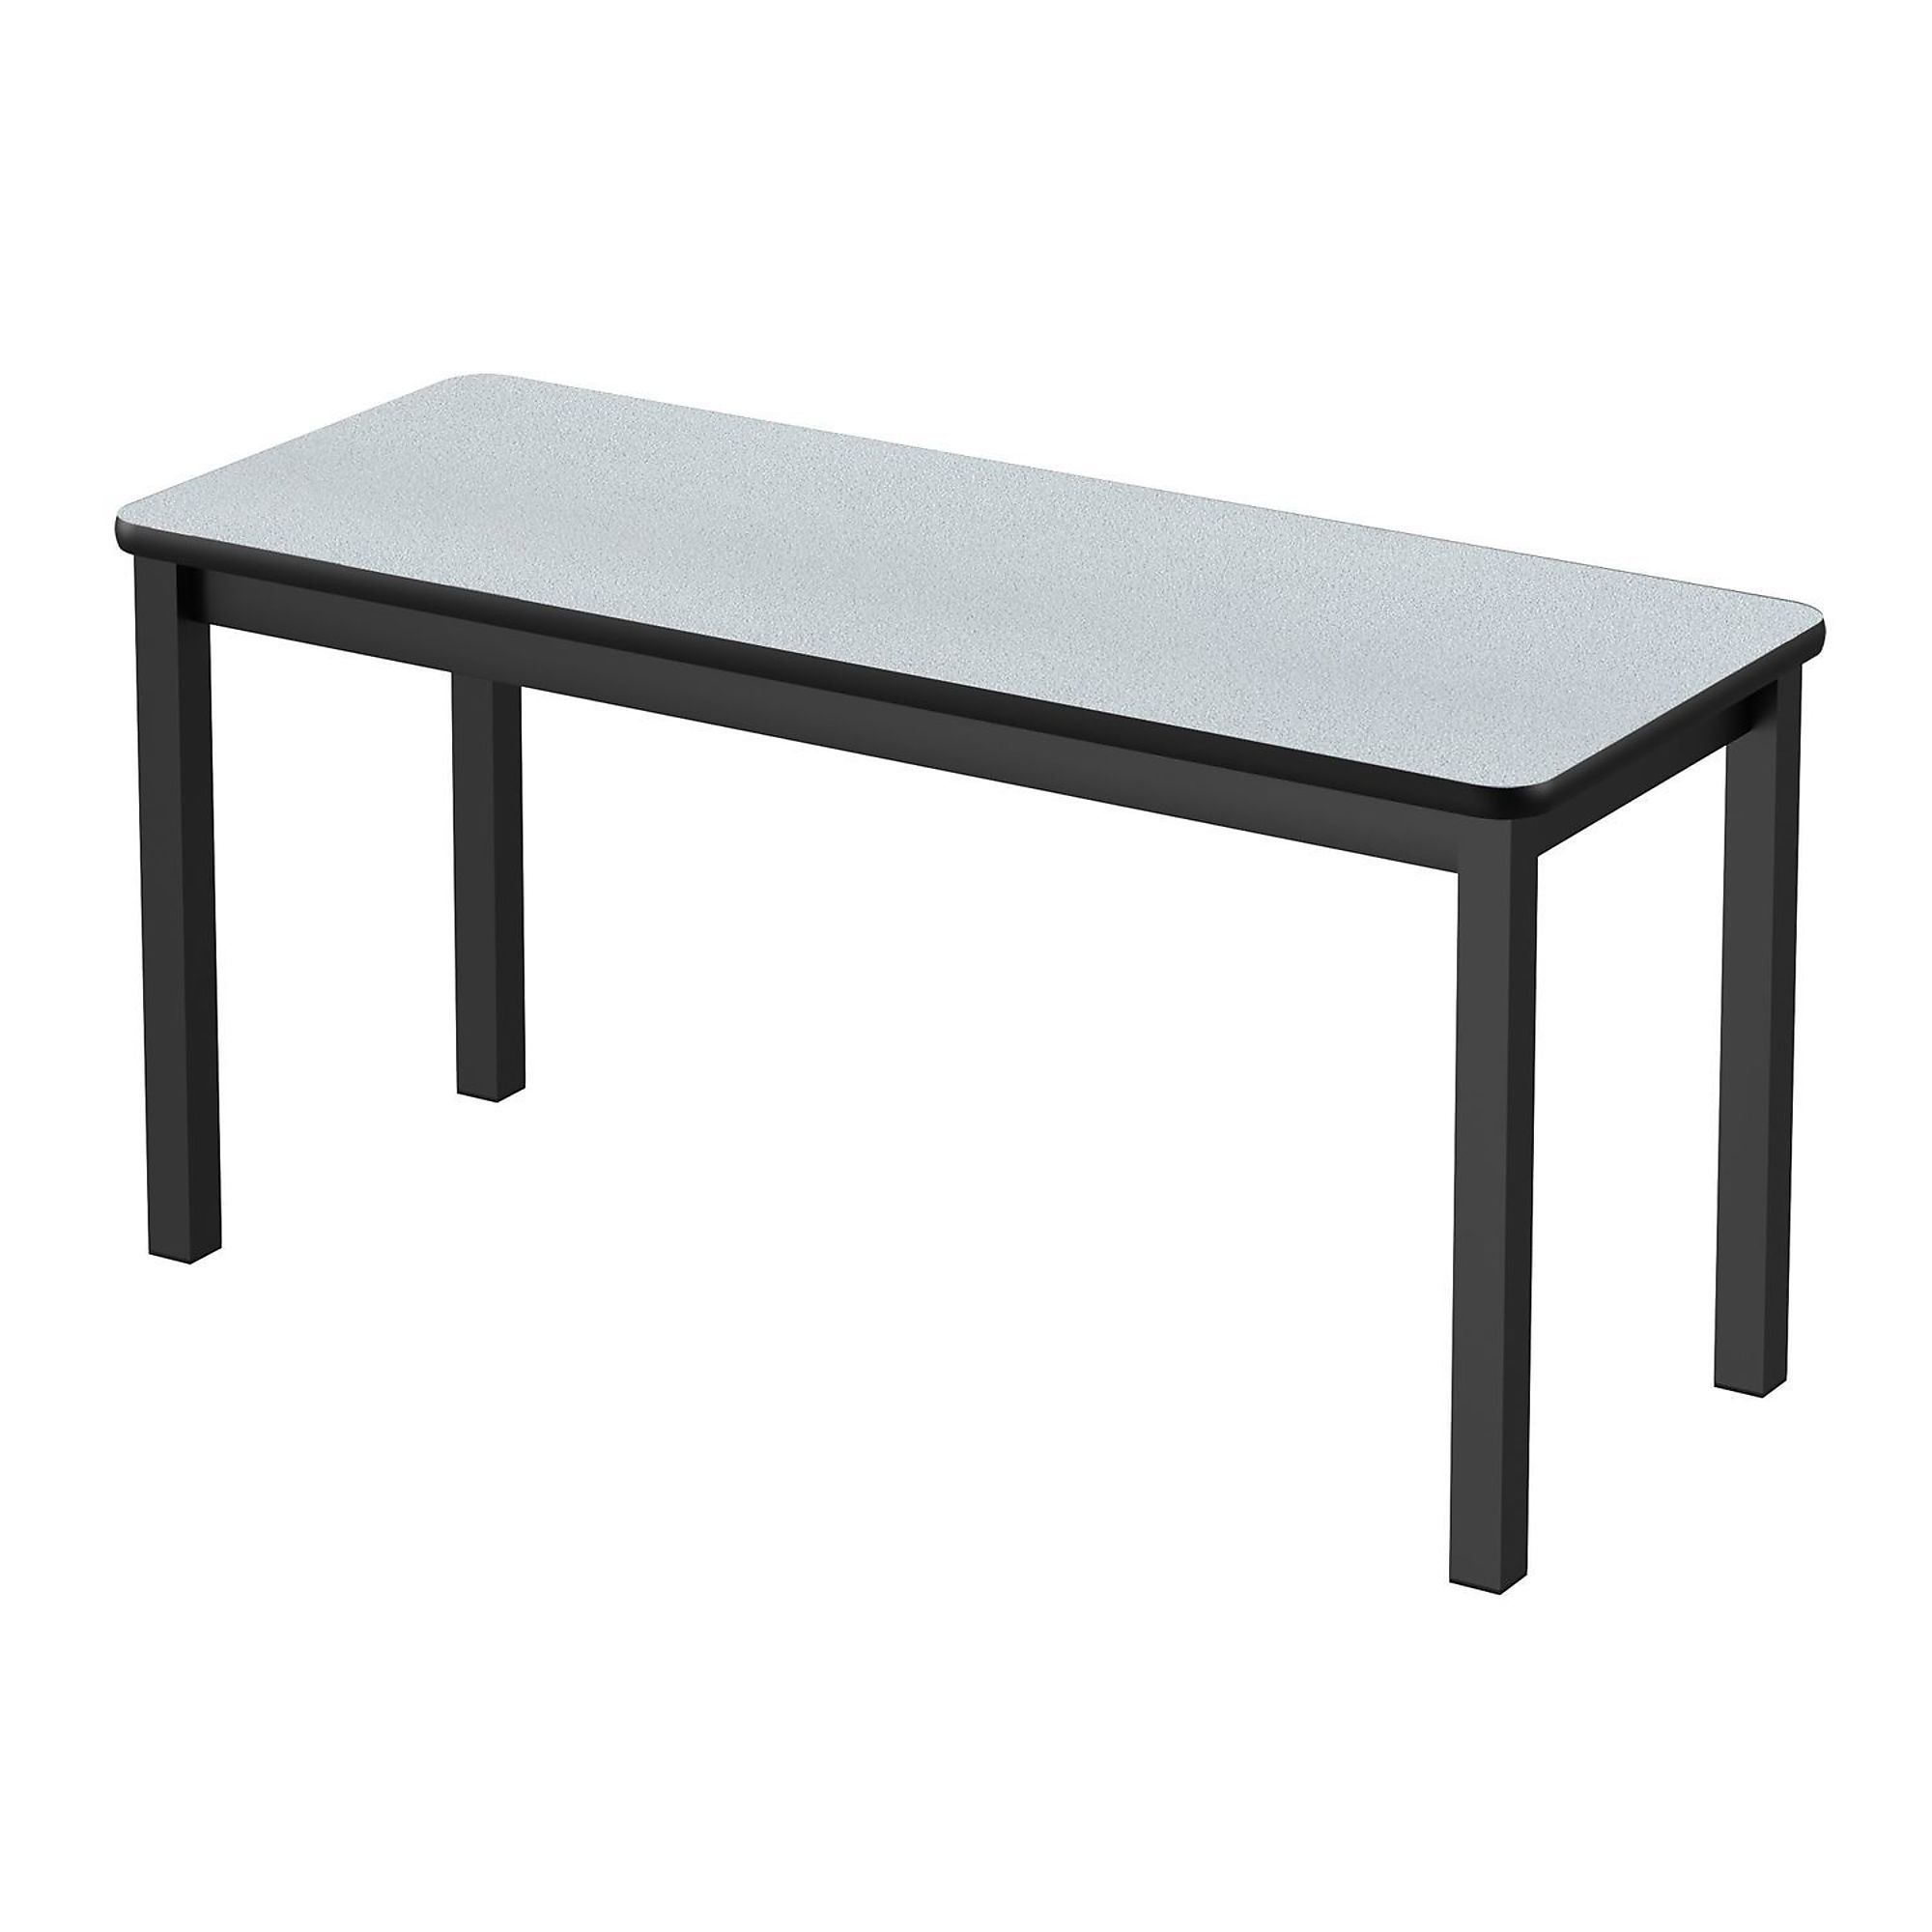 Correll, TFL Library Table, Gray Granite, 24x72, Height 29 in, Width 24 in, Length 72 in, Model LR2472TF-15